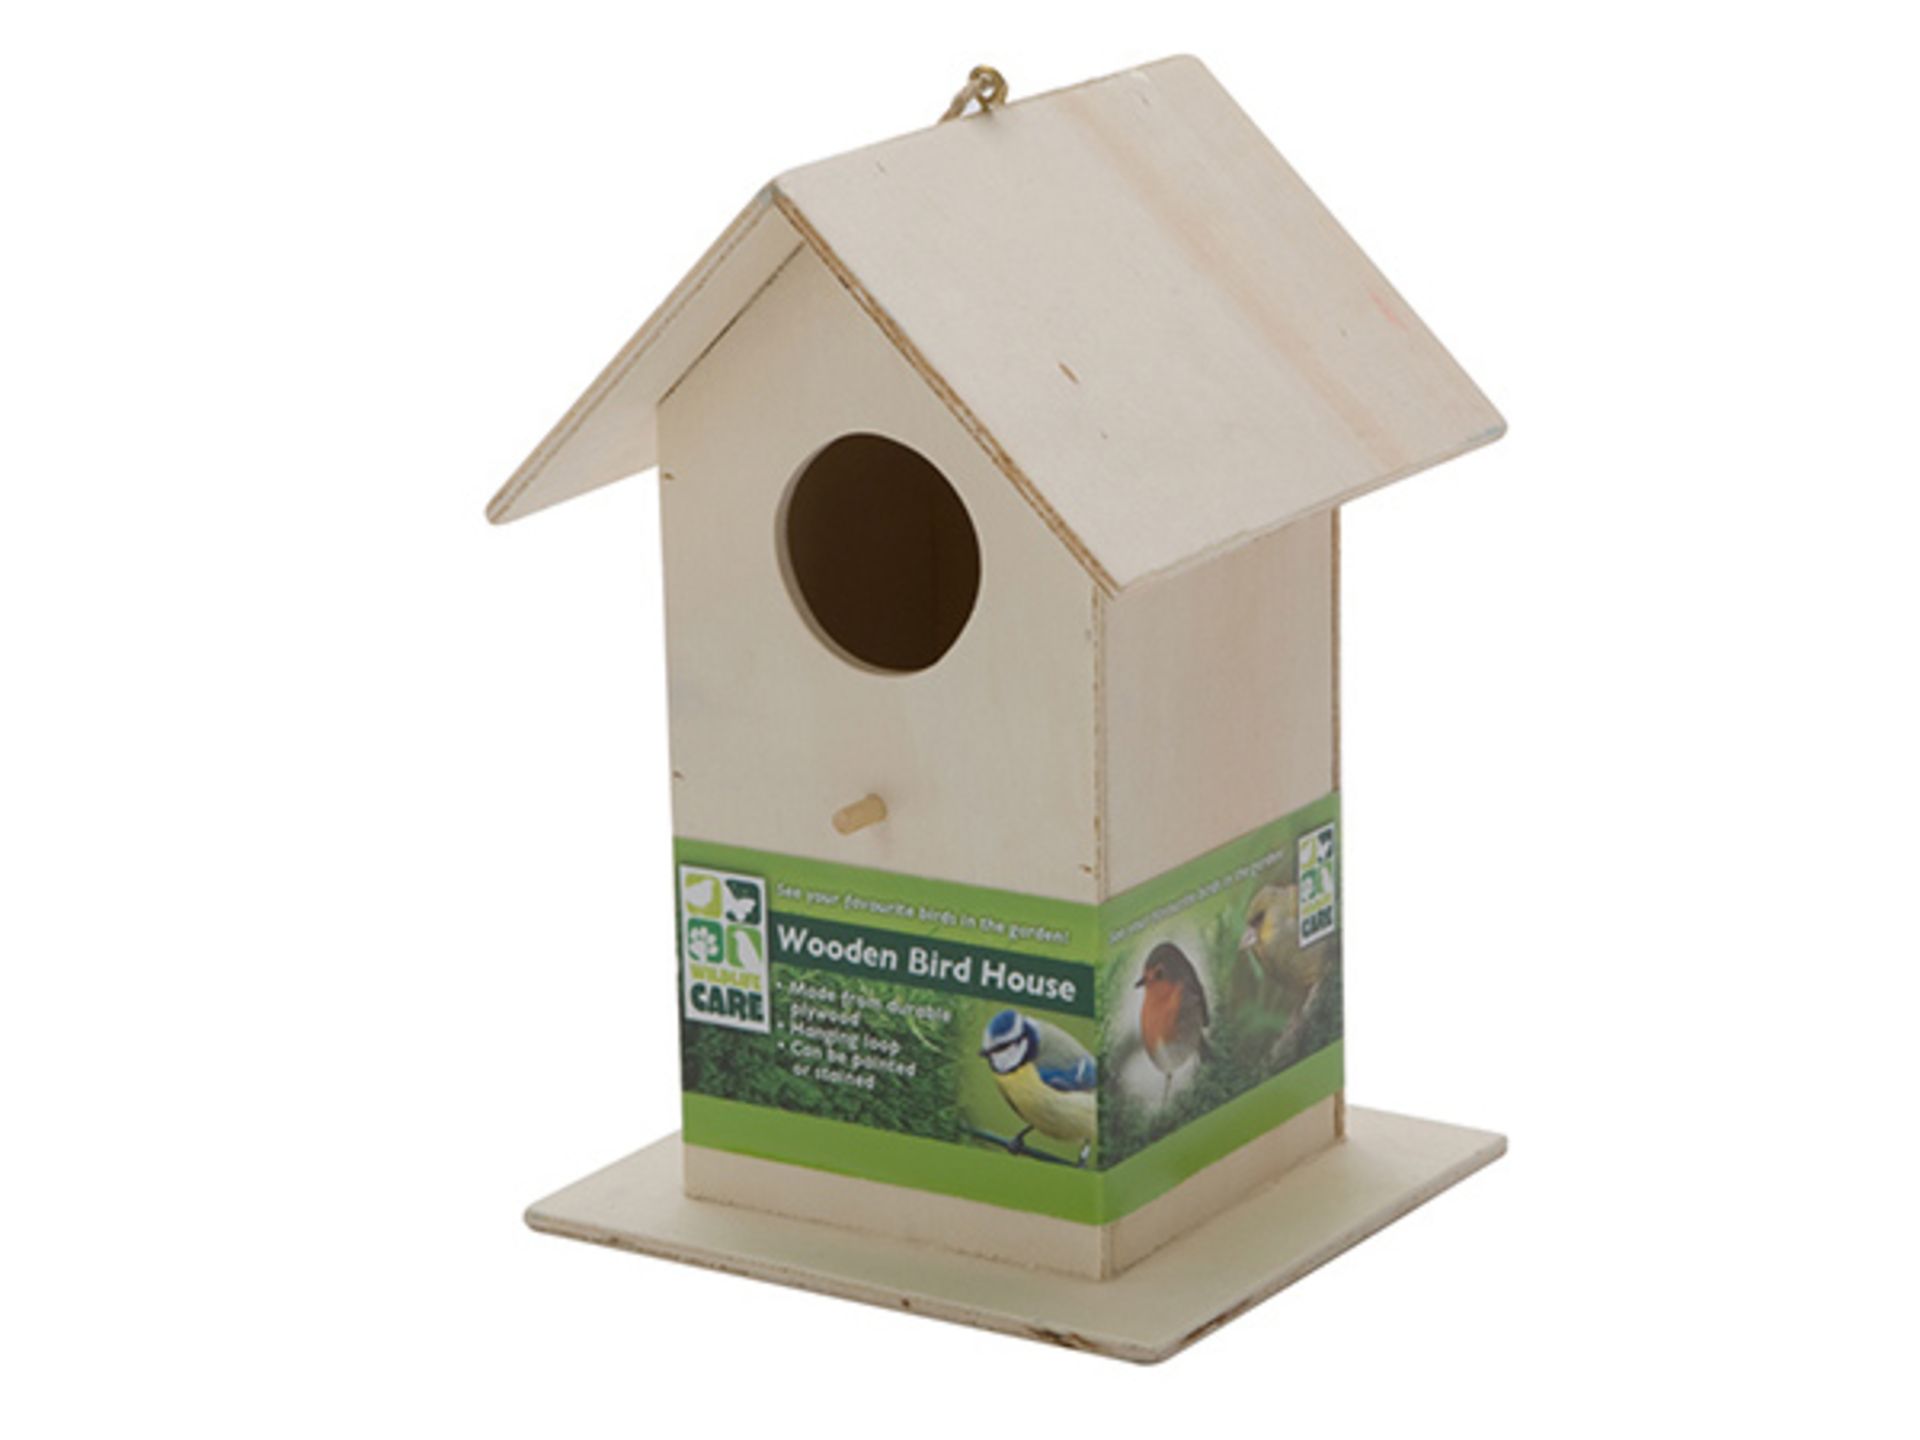 V *TRADE QTY* Brand New Wooden Bird House With Hanging Or Hook Mounting Fixing 18 x 8 cm X 4 YOUR